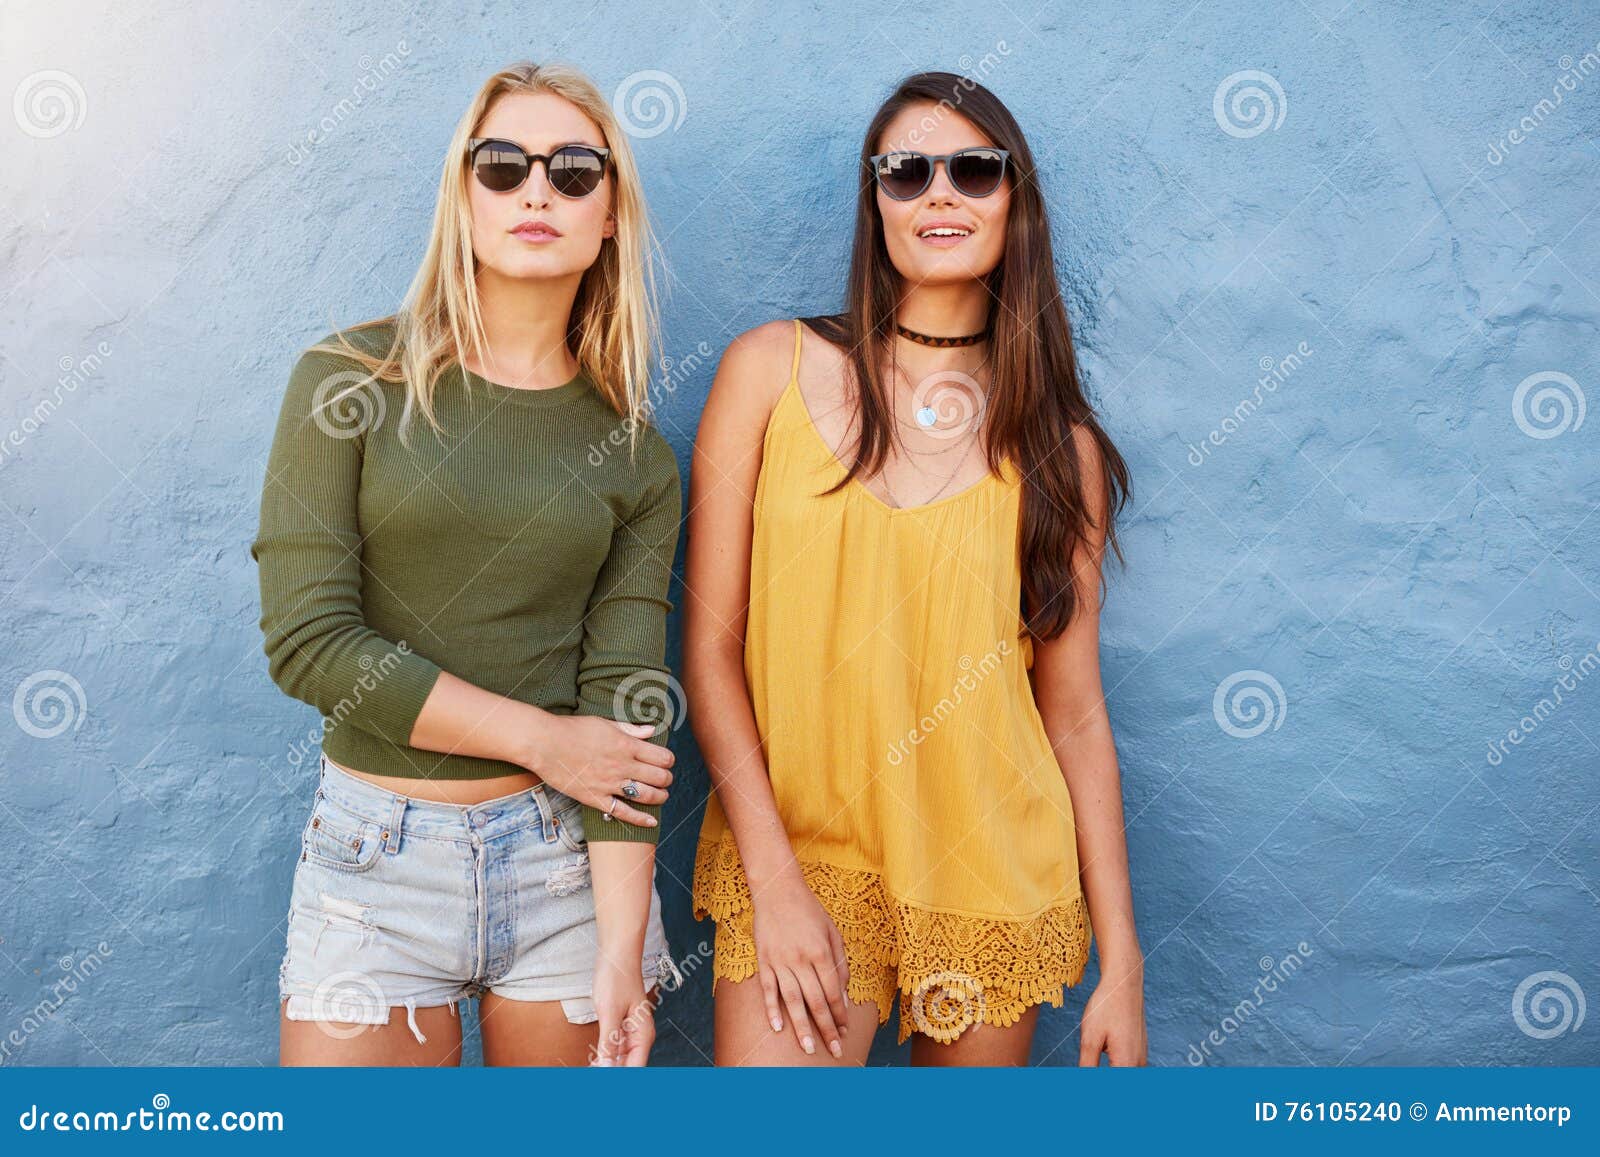 Stylish Young Women Standing Together Stock Photo - Image of ...